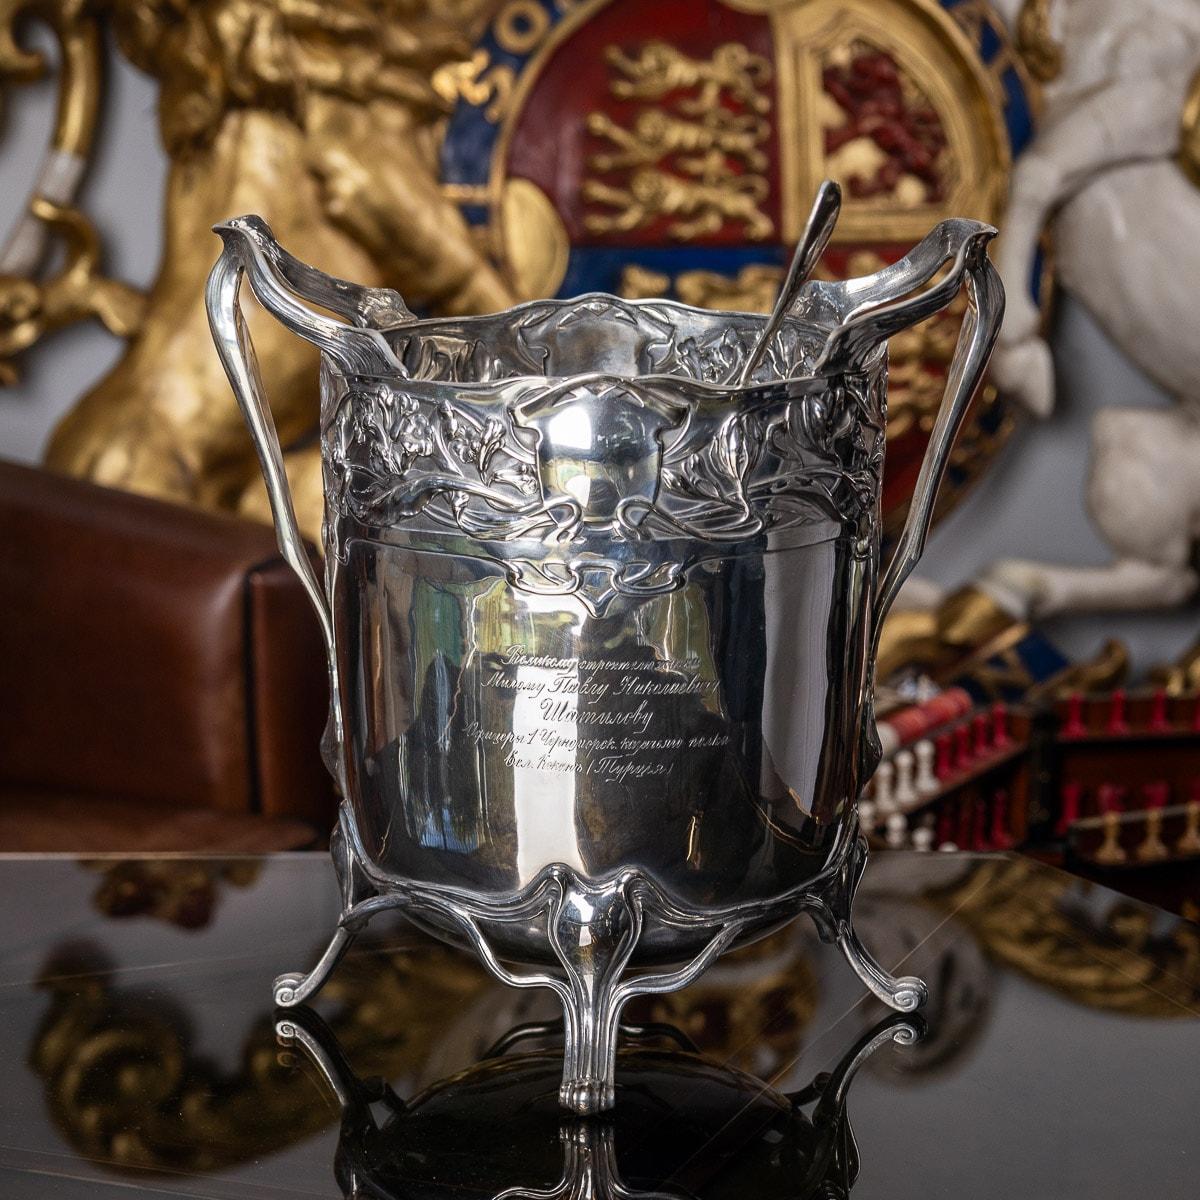 20th century German Art Nouveau silver large punch bowl and ladle, the bowl raised on four spreading scroll feet, decorated throughout with floral motifs and applied with unusual flowing handles. Engraved in Cyrillic on one side “To the great